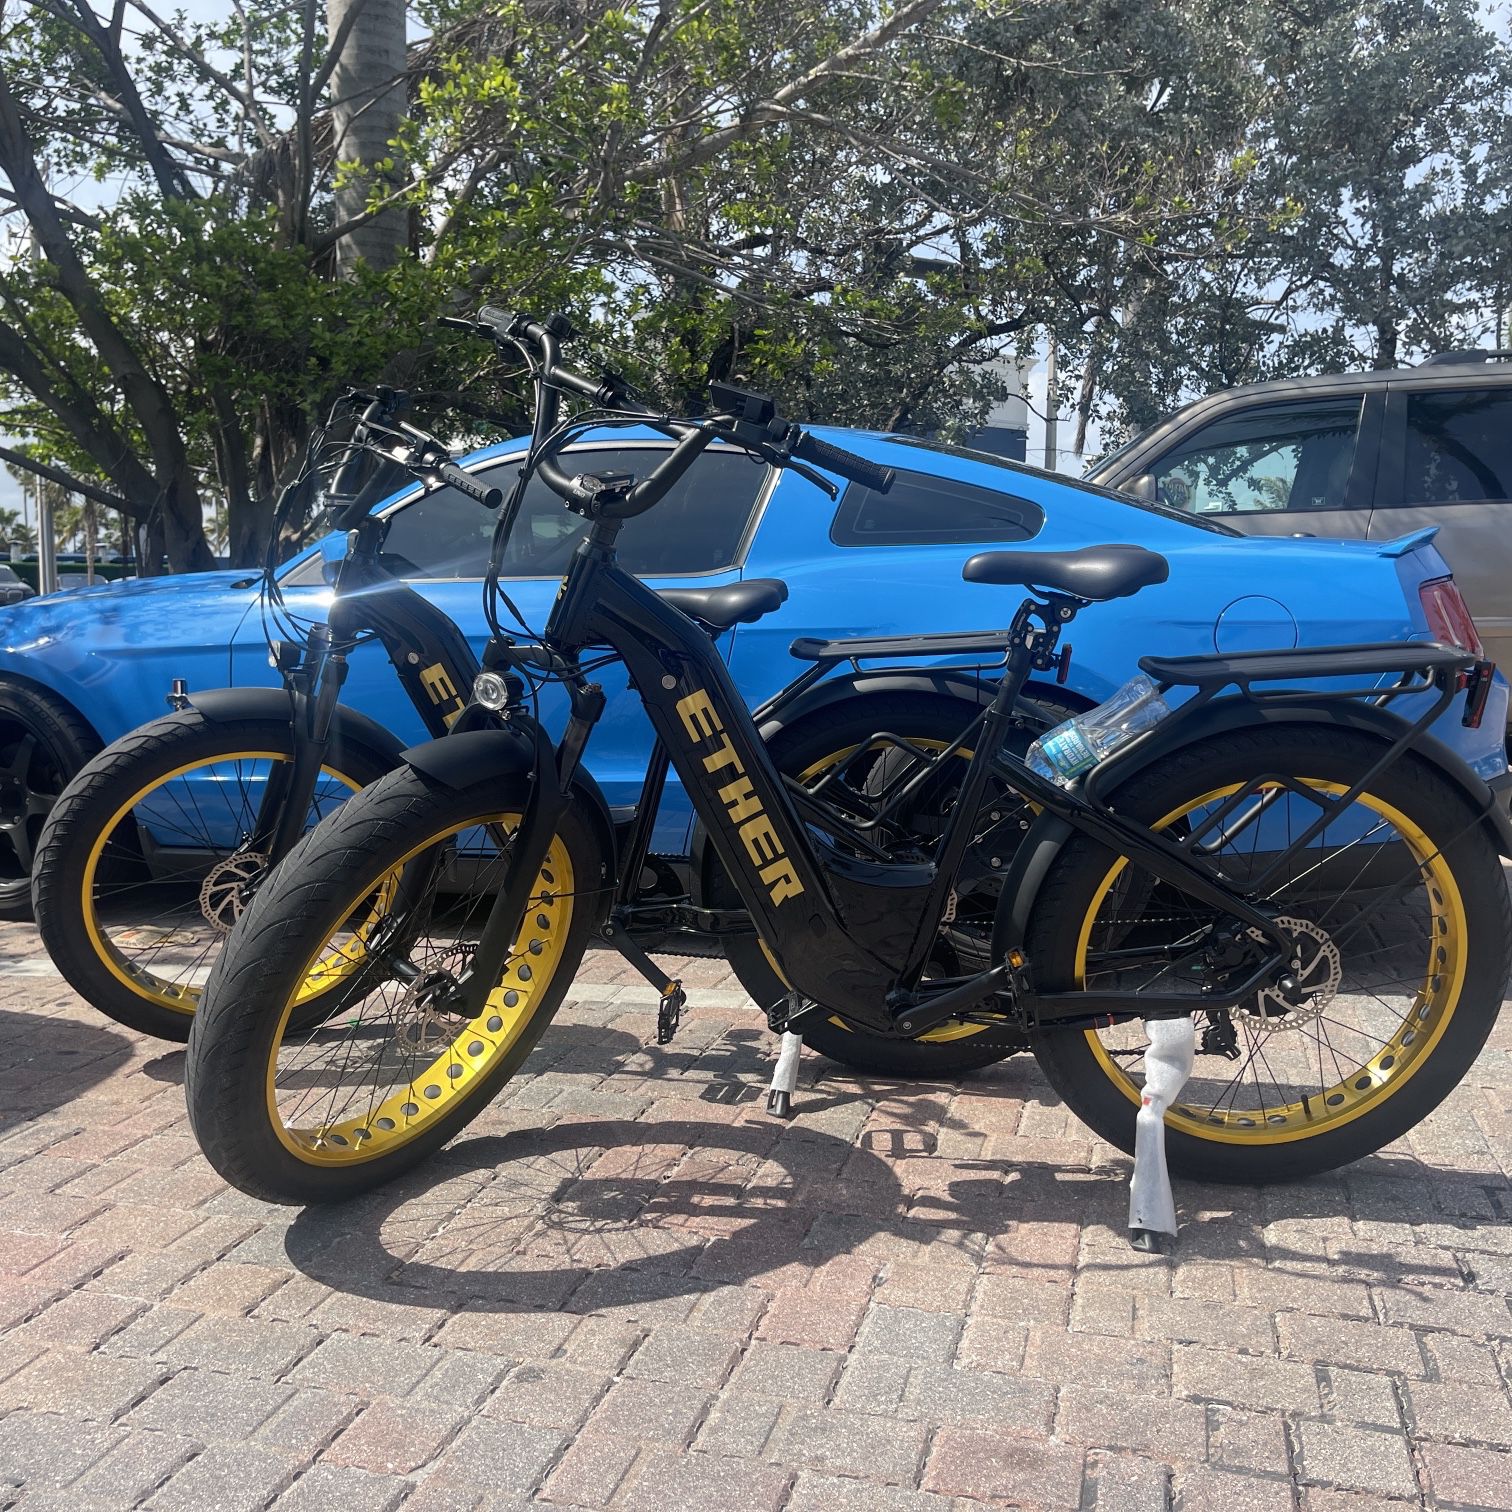  ELECTRIC FAT BIKES 1000watts   “ETHER” $2488 Each  Negotiable 